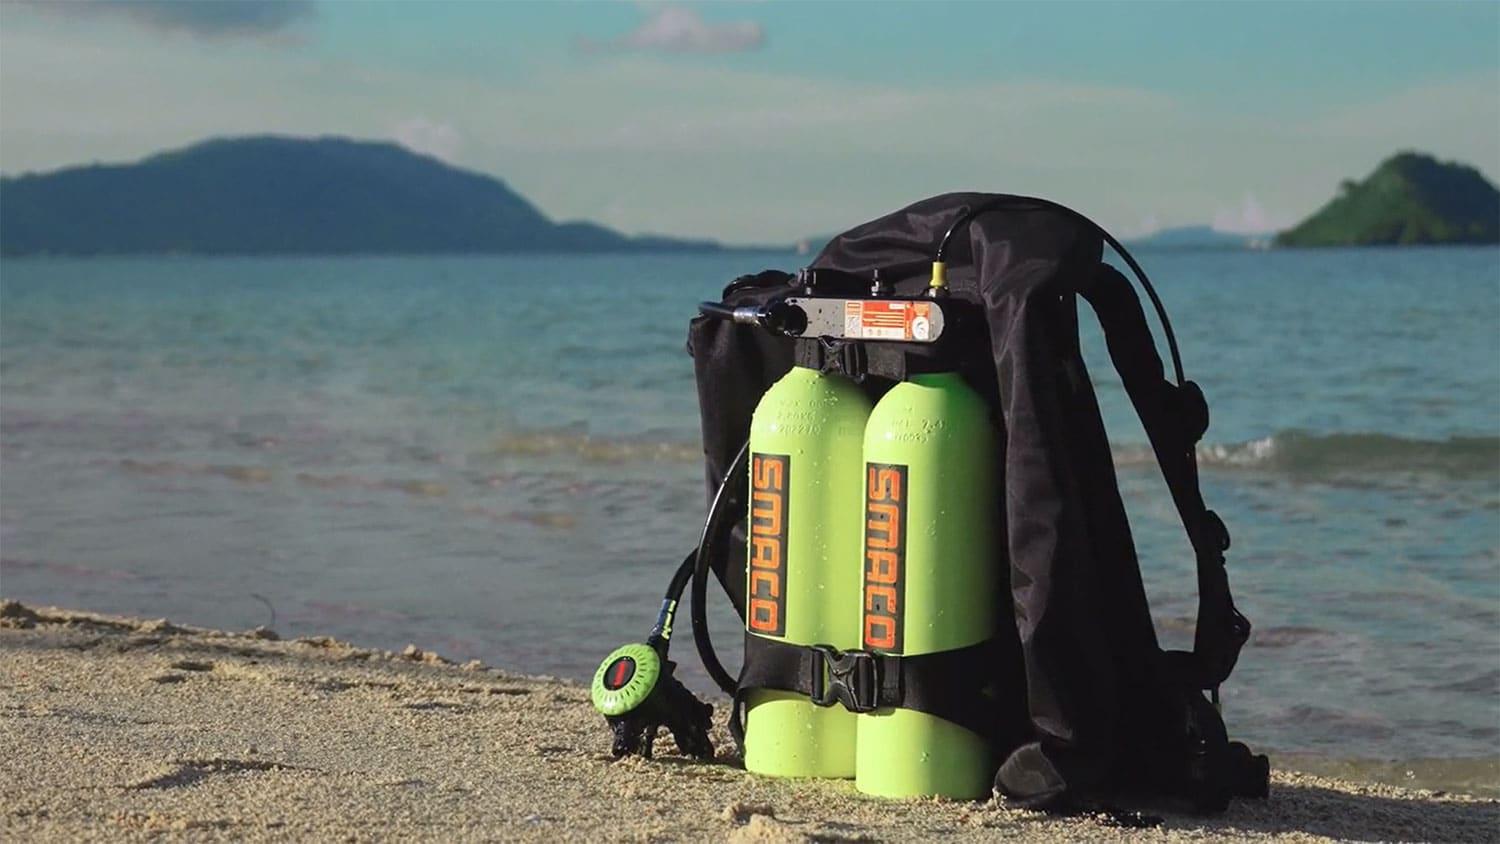 Smaco S700MAX scuba tanks for extended underwater exploration.